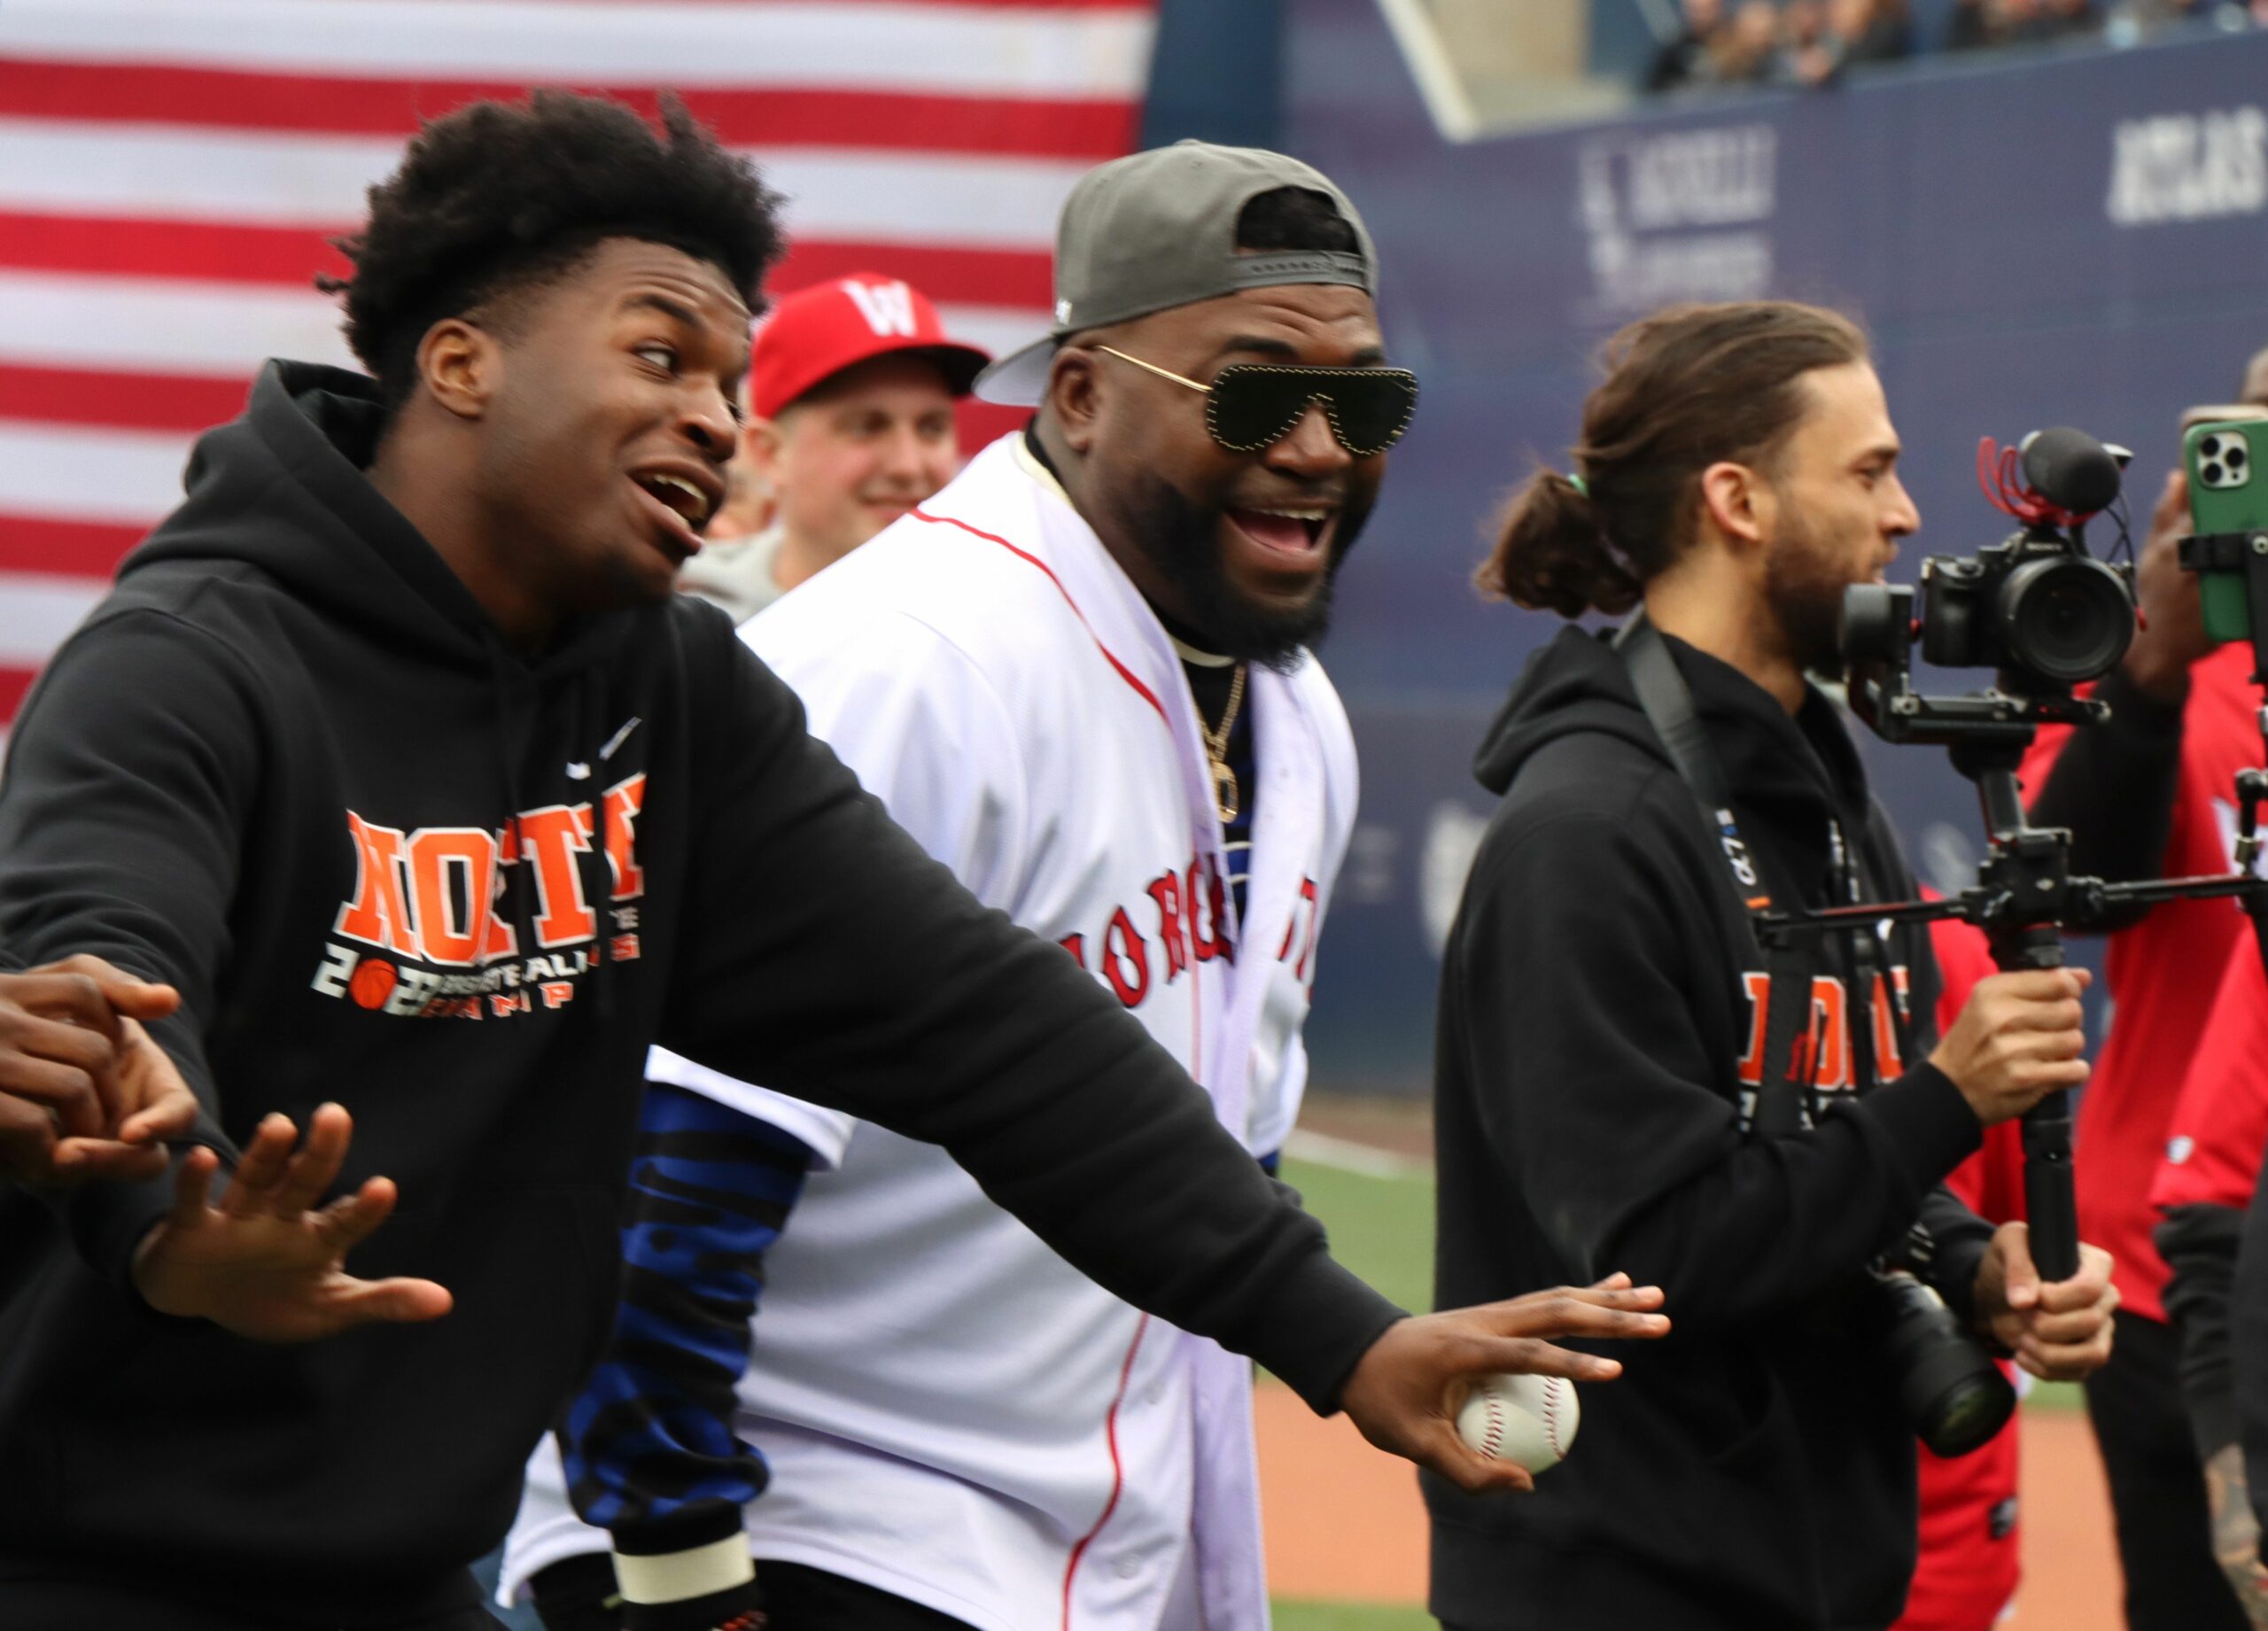 WOOSOX OPENING DAY 2023: Big Papi Comes to Worcester - Worcester